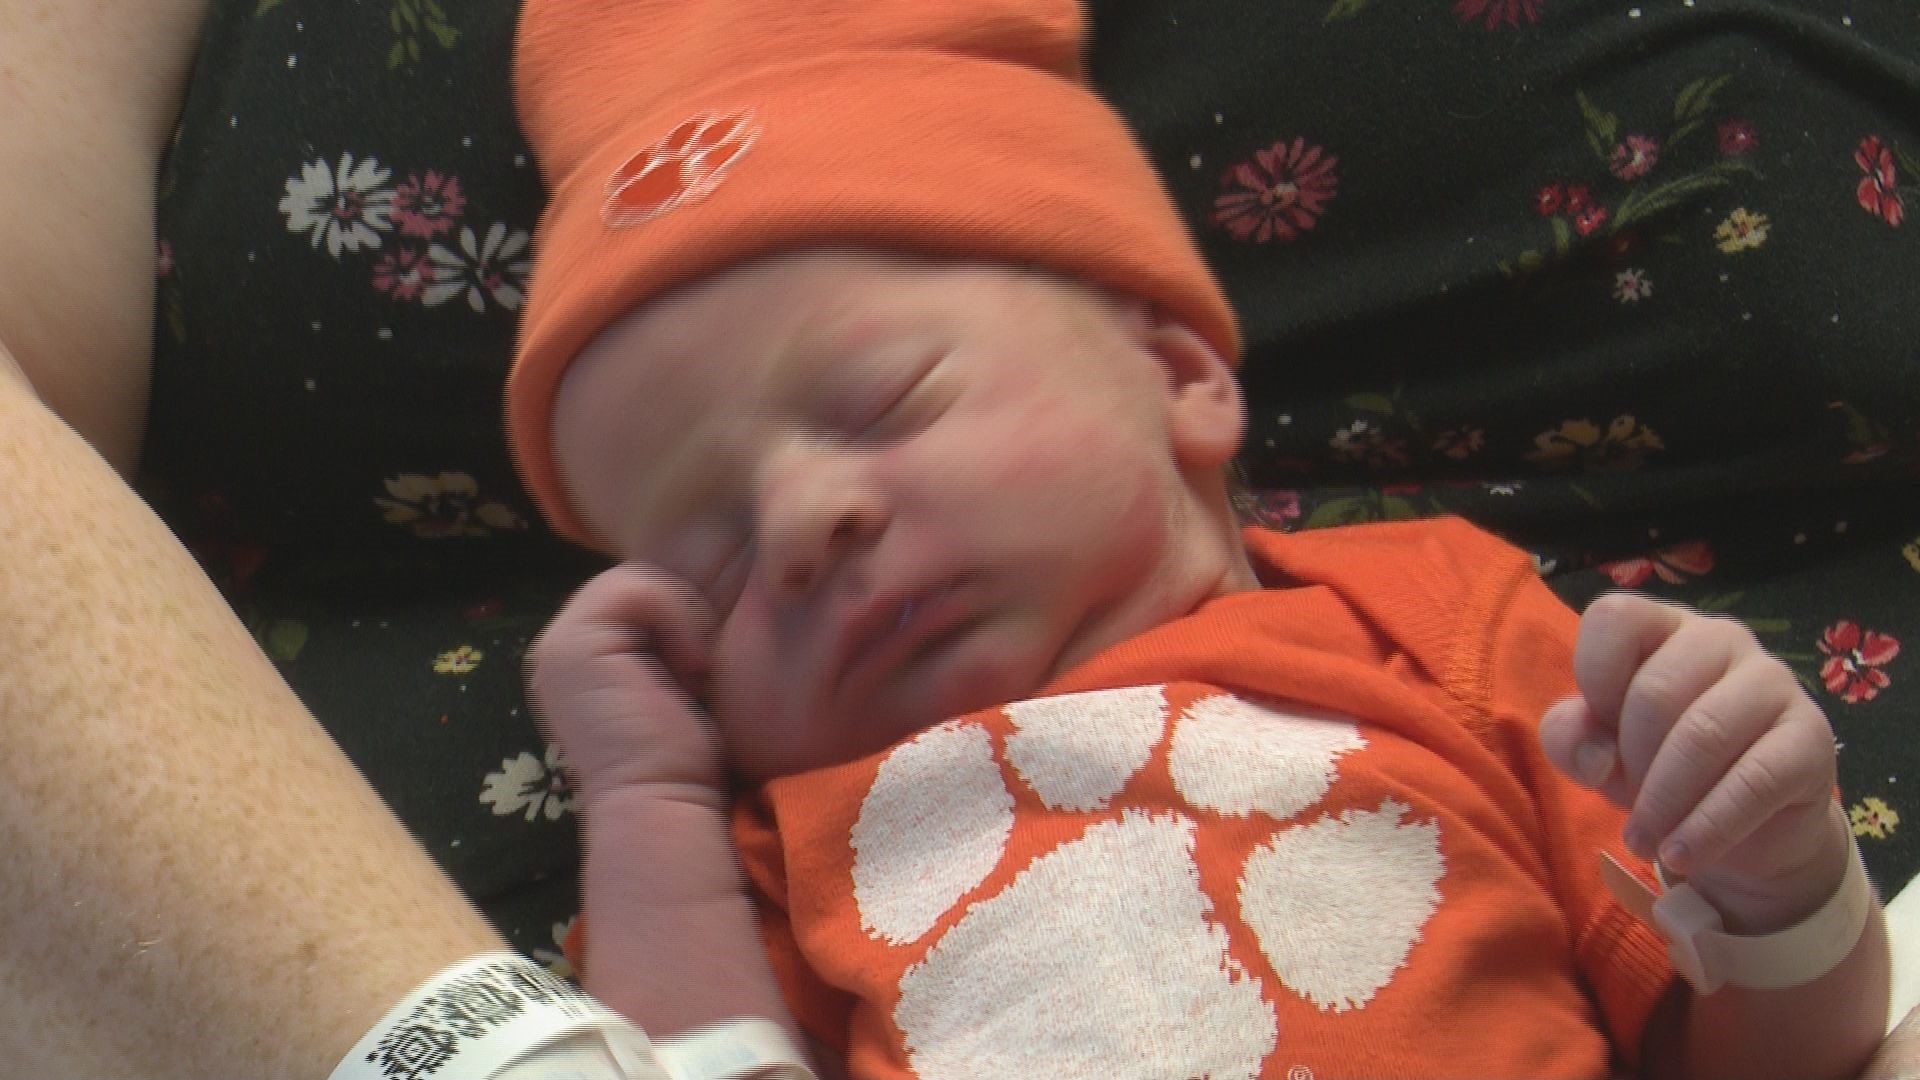 Clemson fans Carl Moore and Brittany Tomberlin welcomed their son Marshal into the world the same day Clemson defeated Ohio State in the Fiesta Bowl.